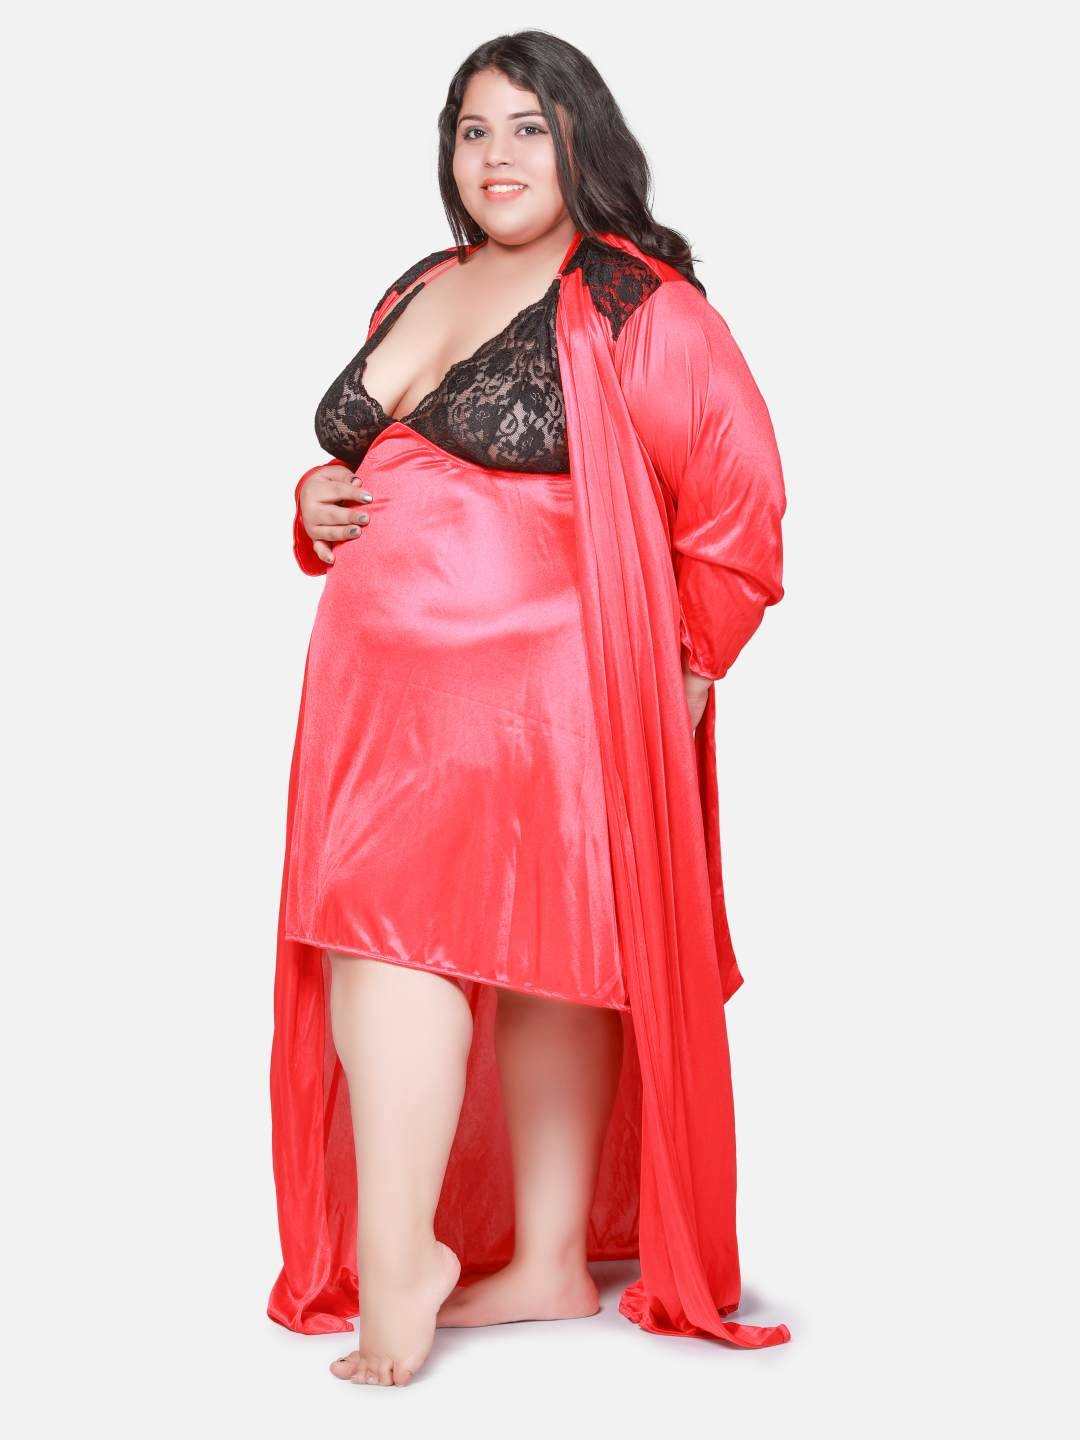 Plus Size Hot Two Piece Red Babydoll Night Dress for Honeymoon BB301C